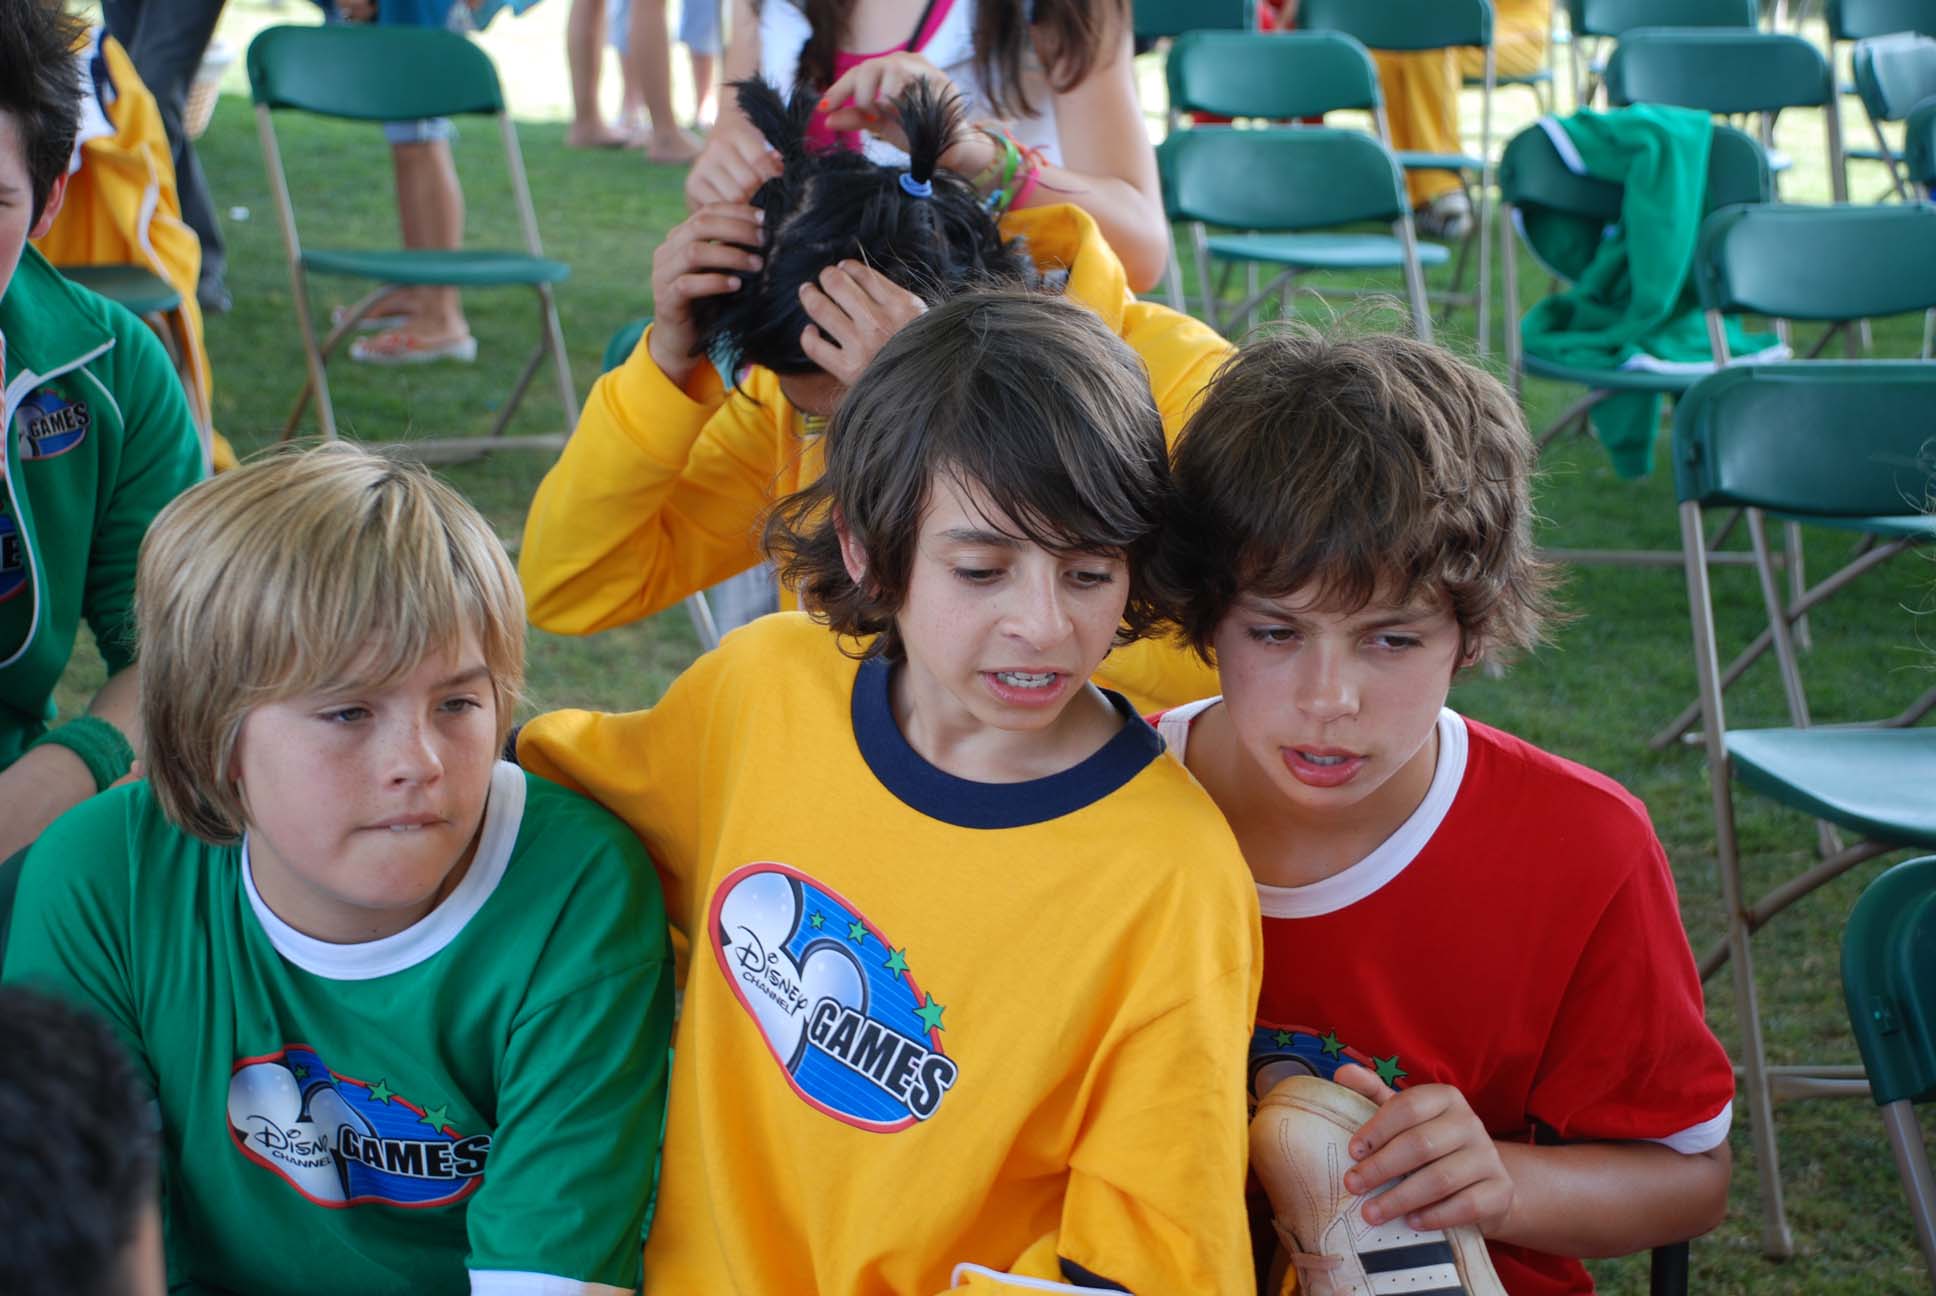 Moises Arias in Disney Channel Games 2008